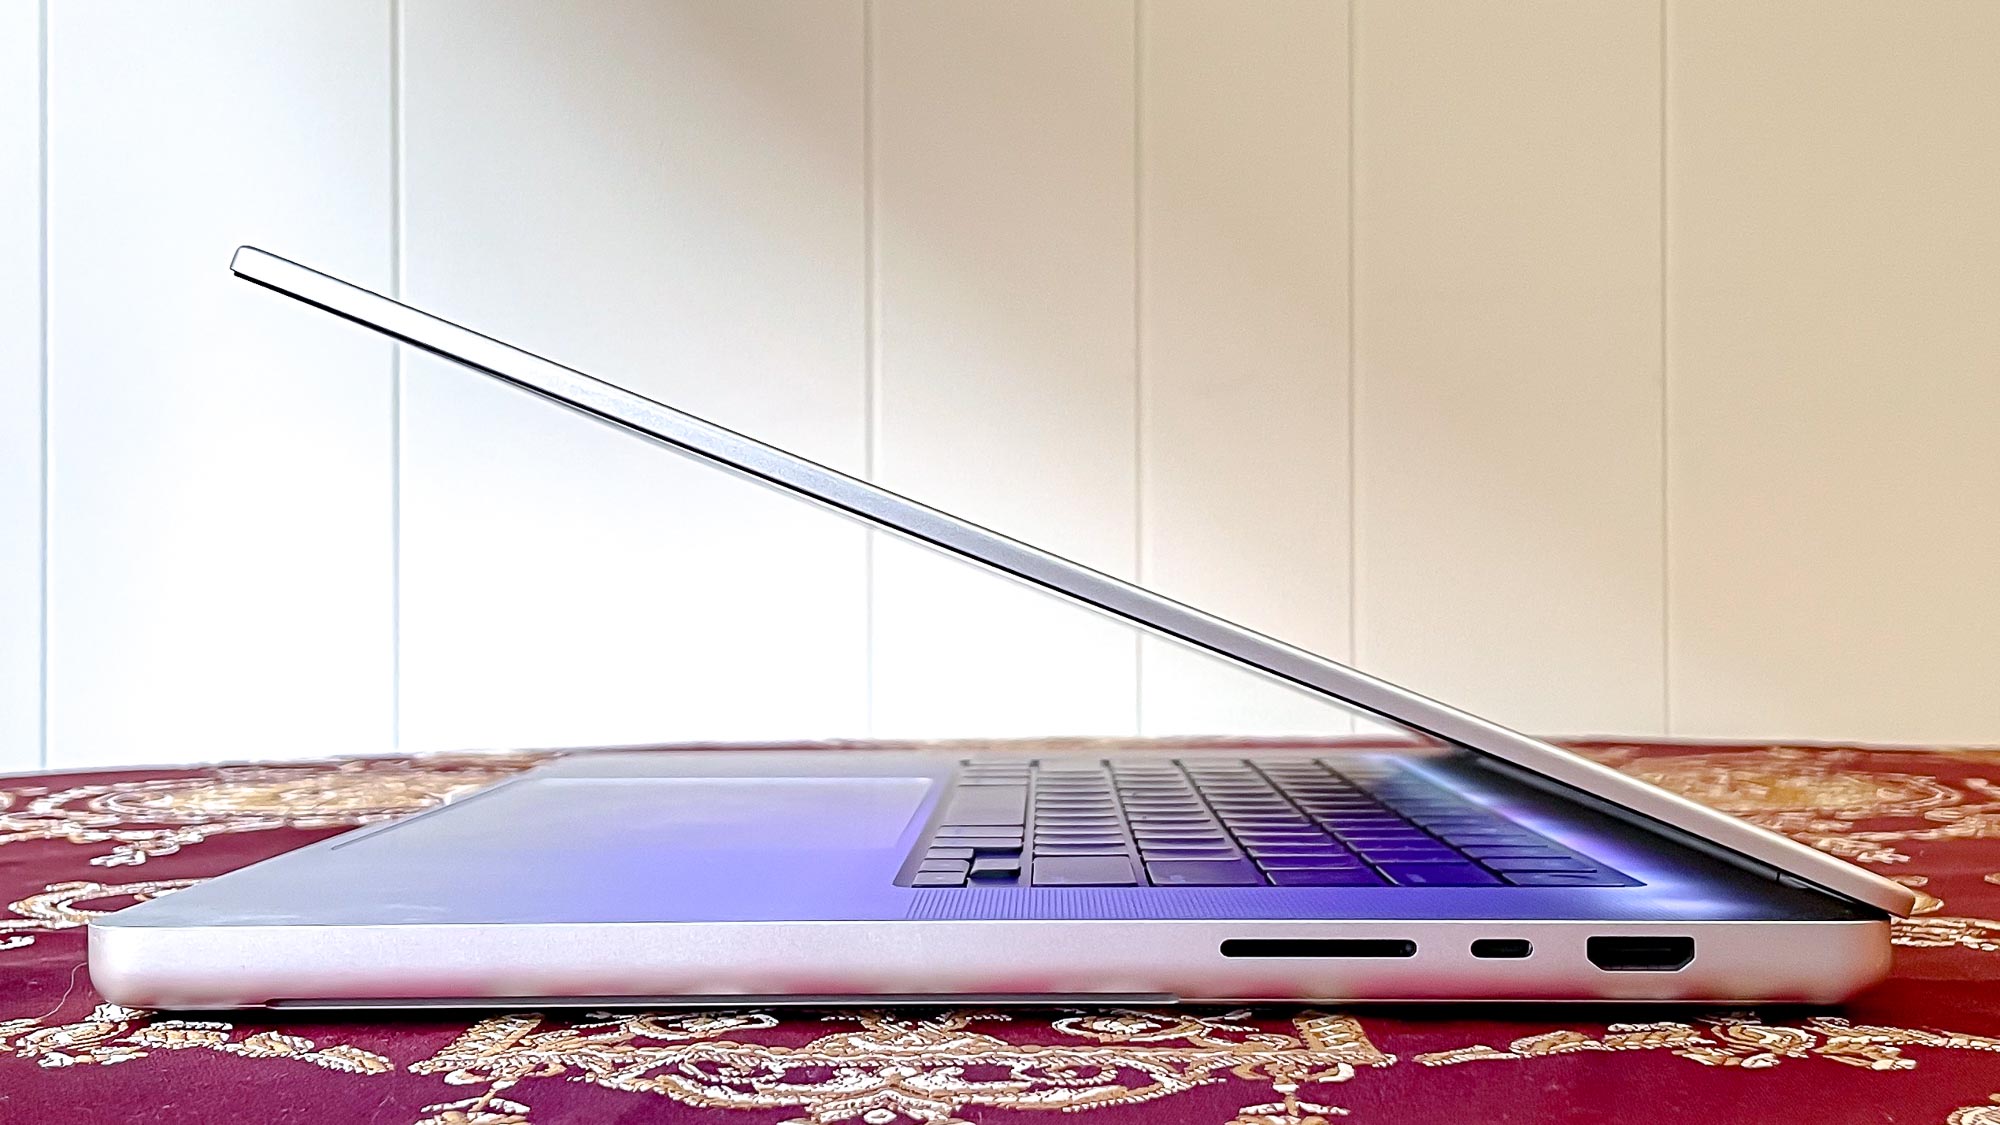 MacBook Pro 2021 (16-inch) on a table, right edge showing